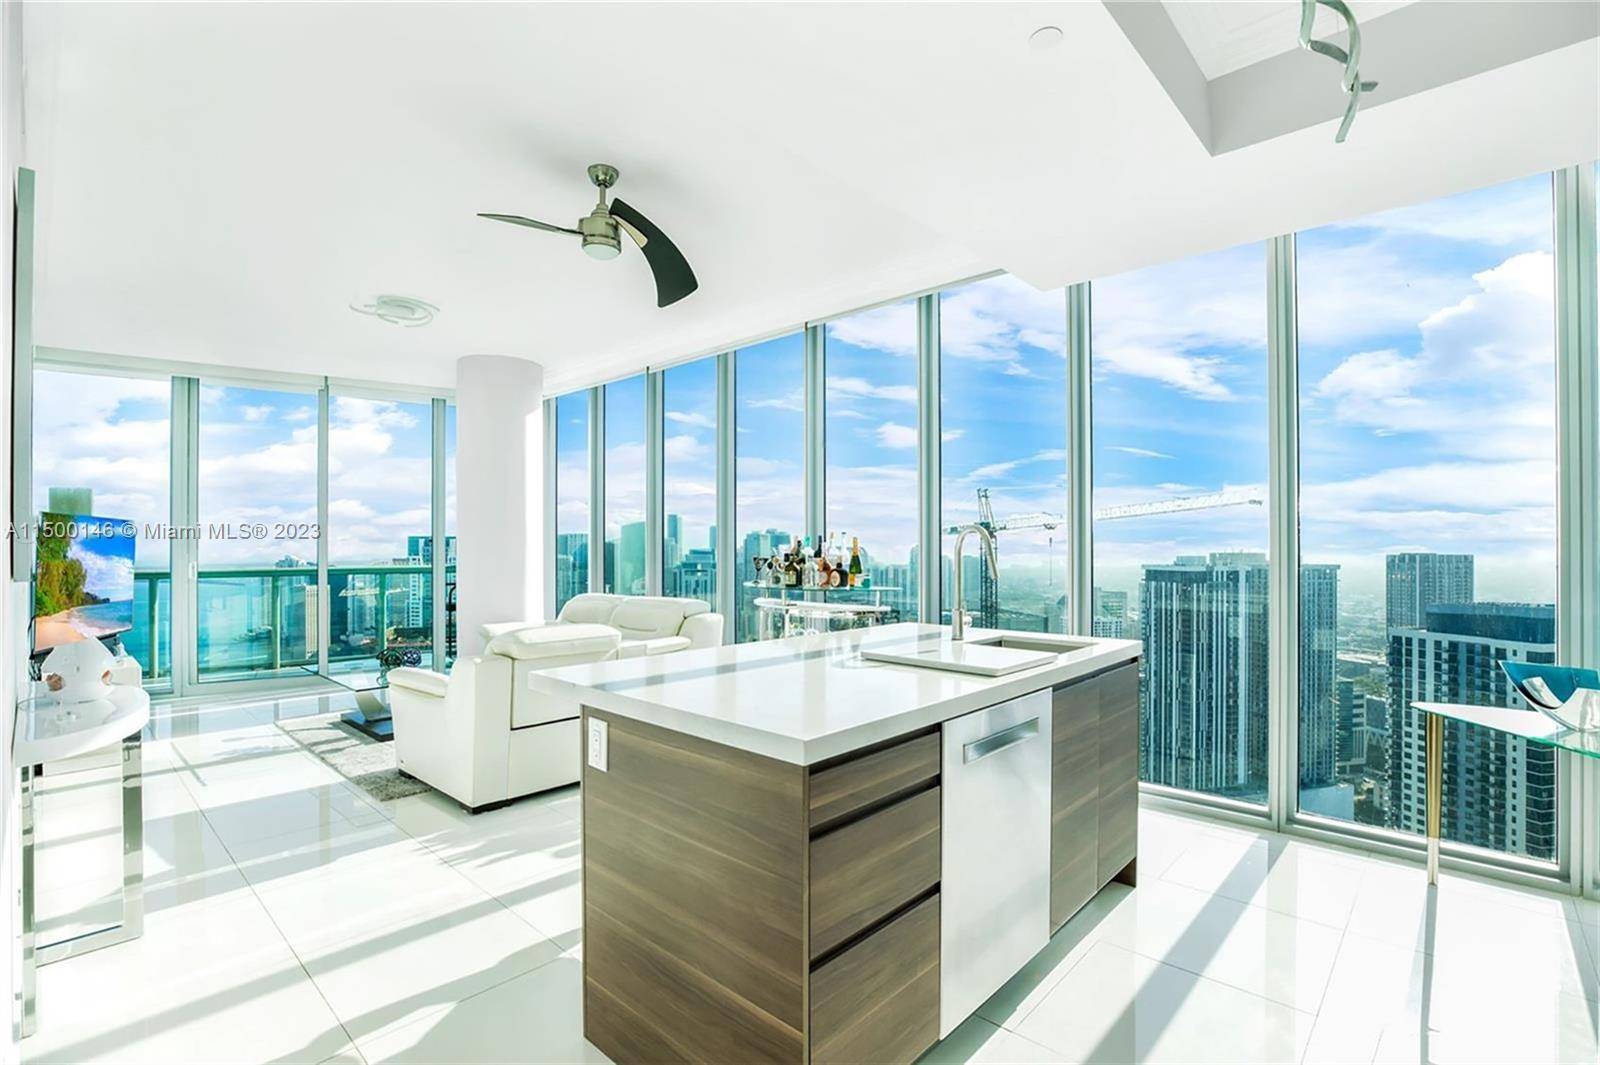 Step into this stunning 2 Bed condominium situated in the 01 line on the 53rd floor.